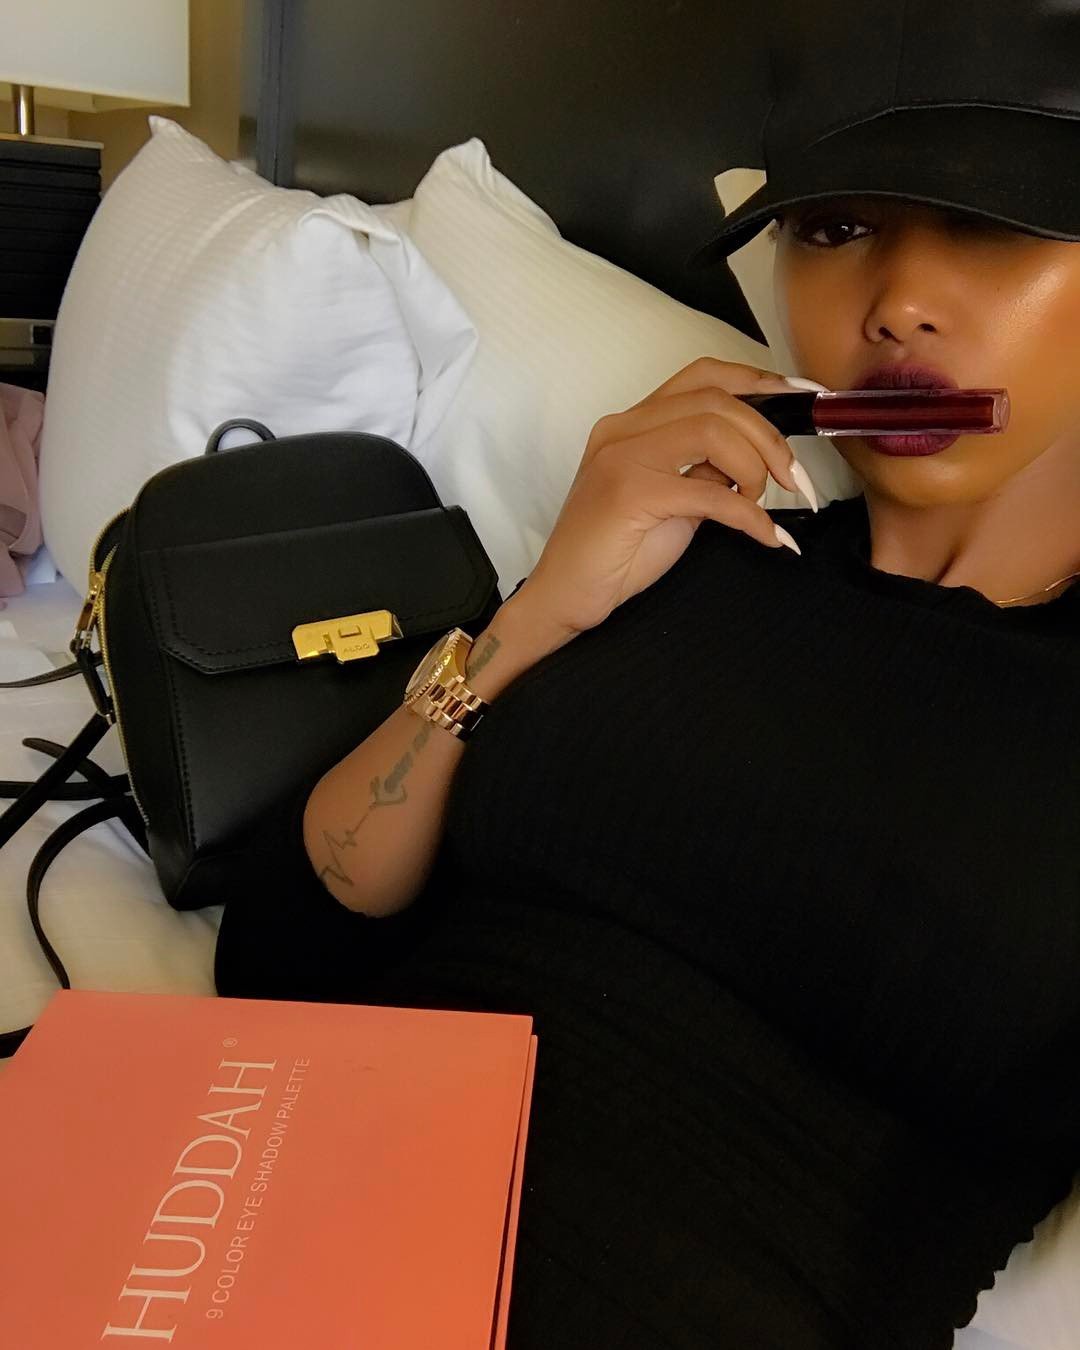 "I could've died but I'm well now" Huddah talks about the cosmetic surgery that almost cost her life